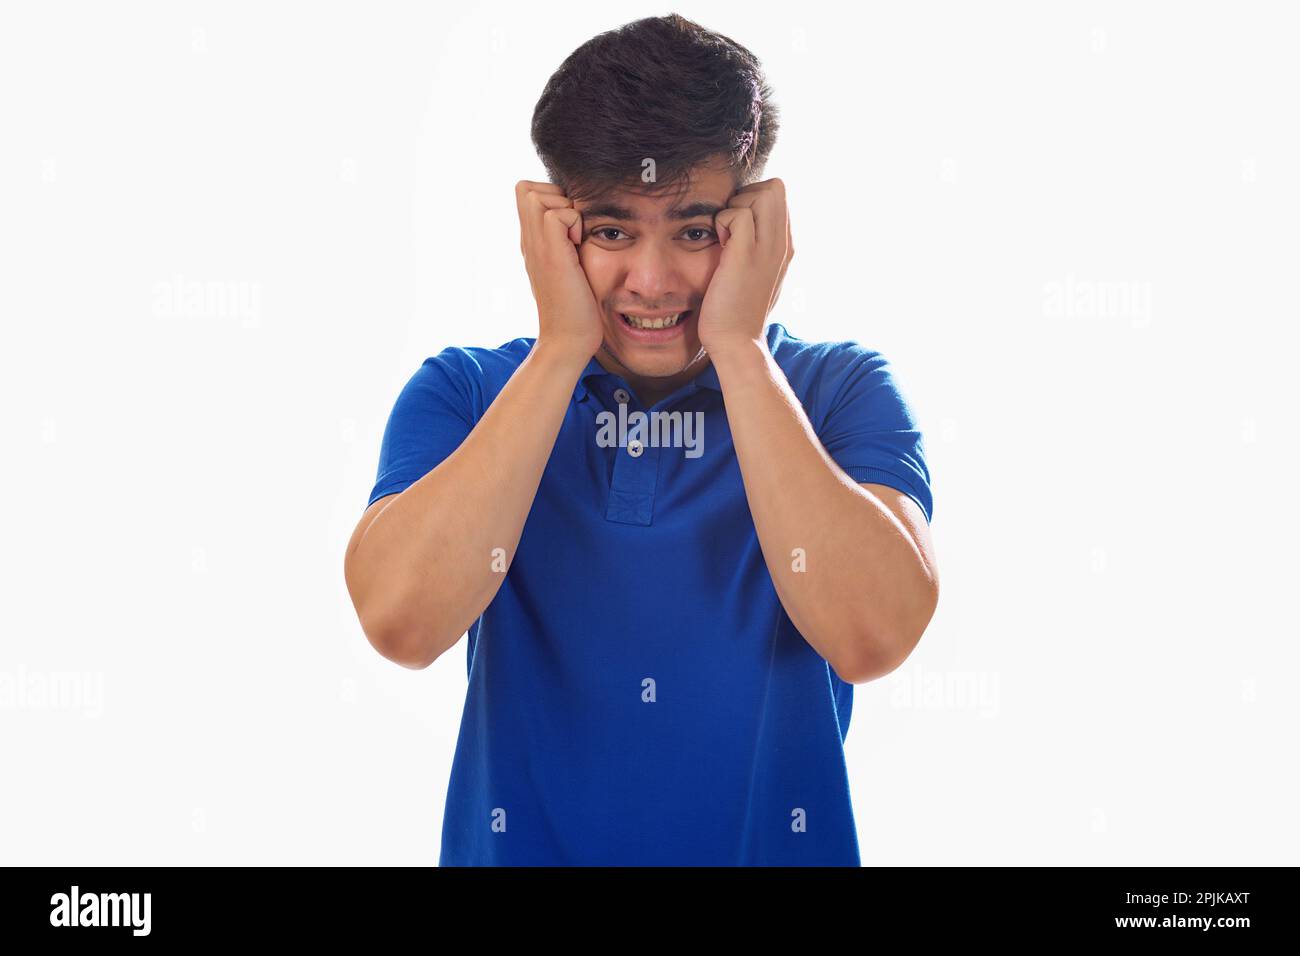 Portrait of frustrated young man against white background Stock Photo